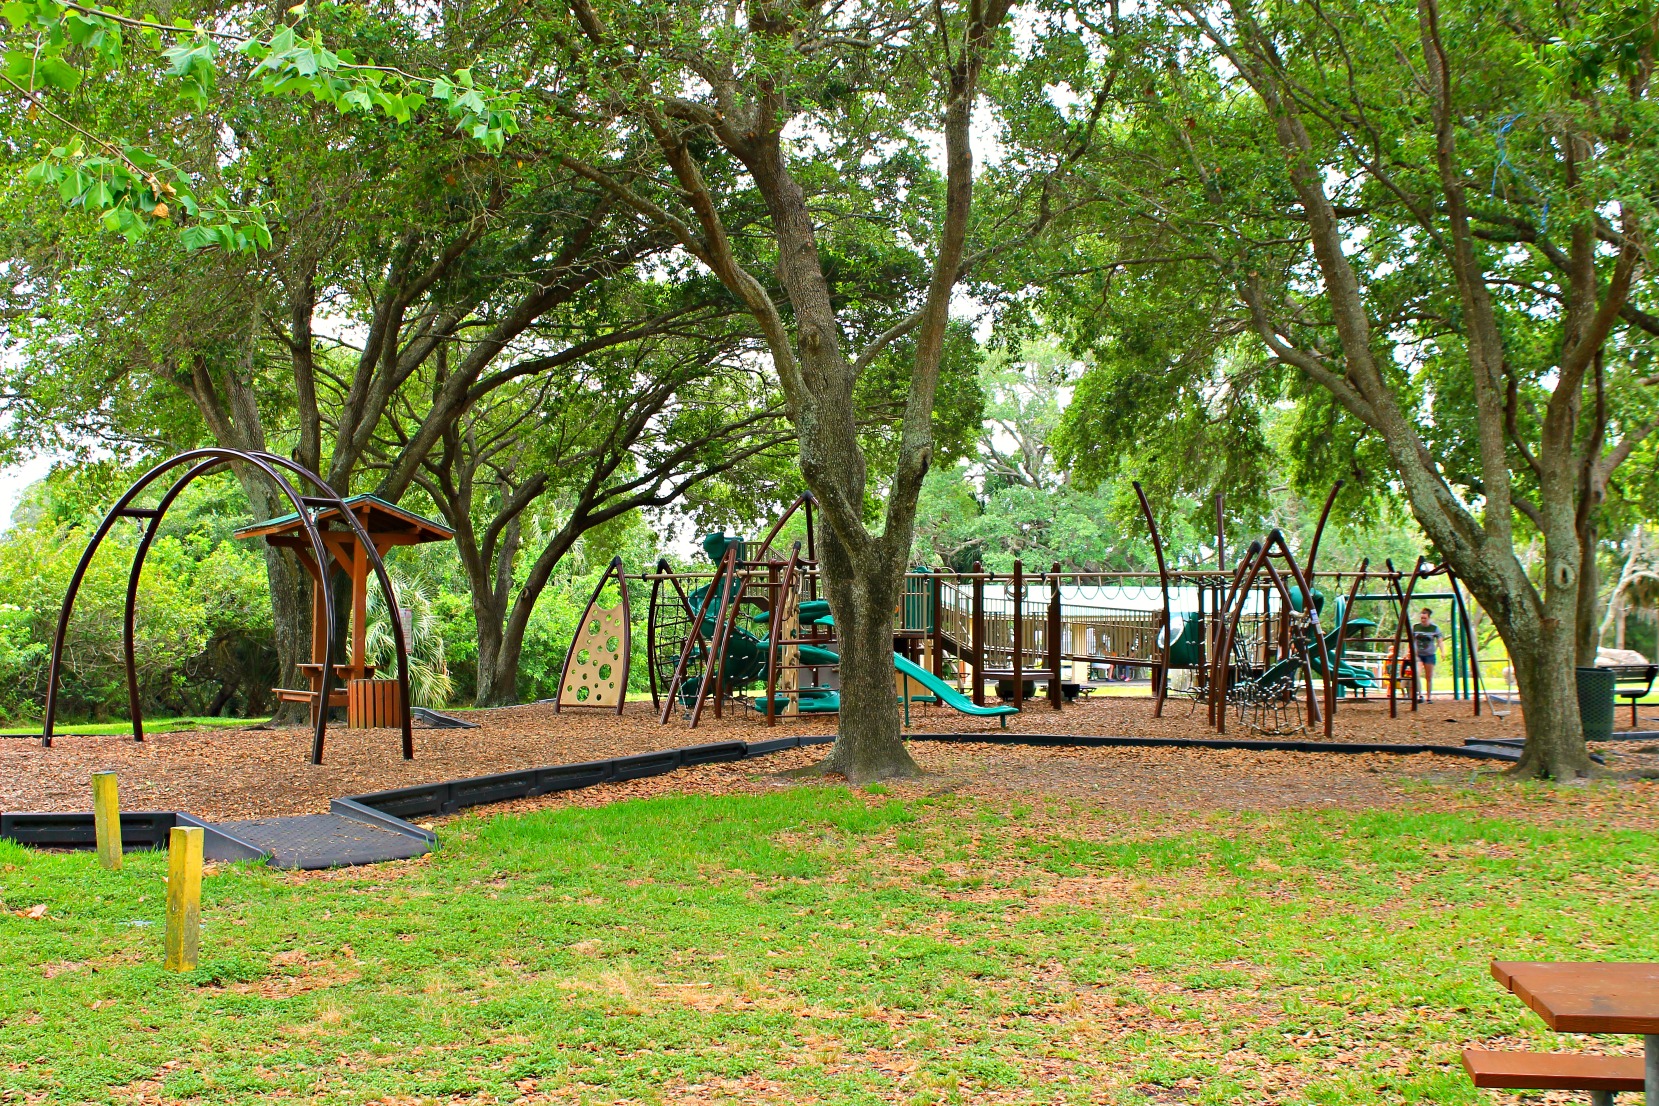 A playground surrounded by trees and greenery